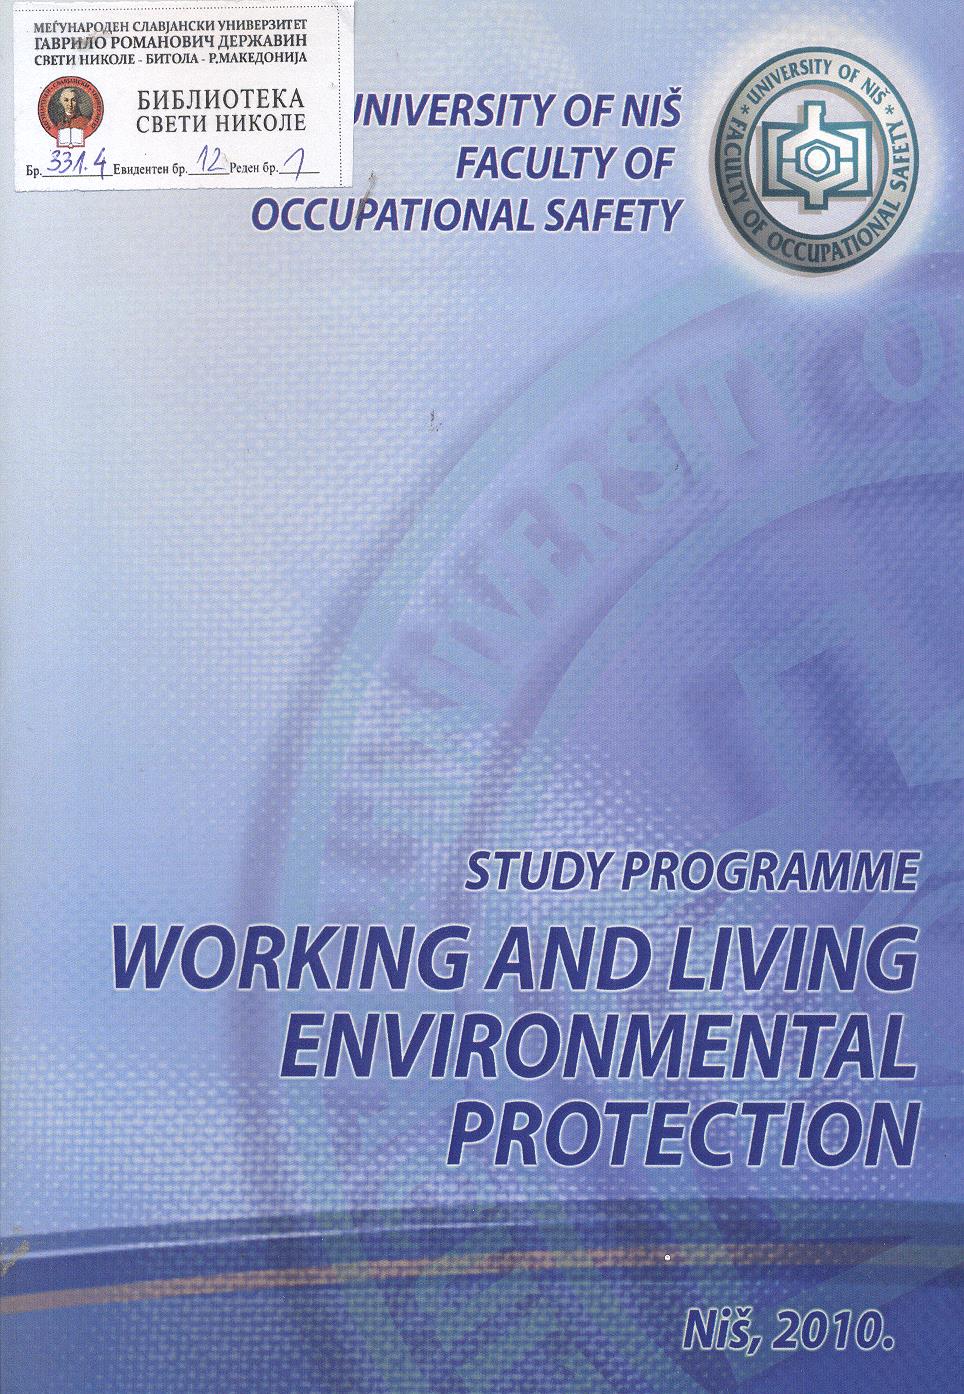 Working and living environmental protection